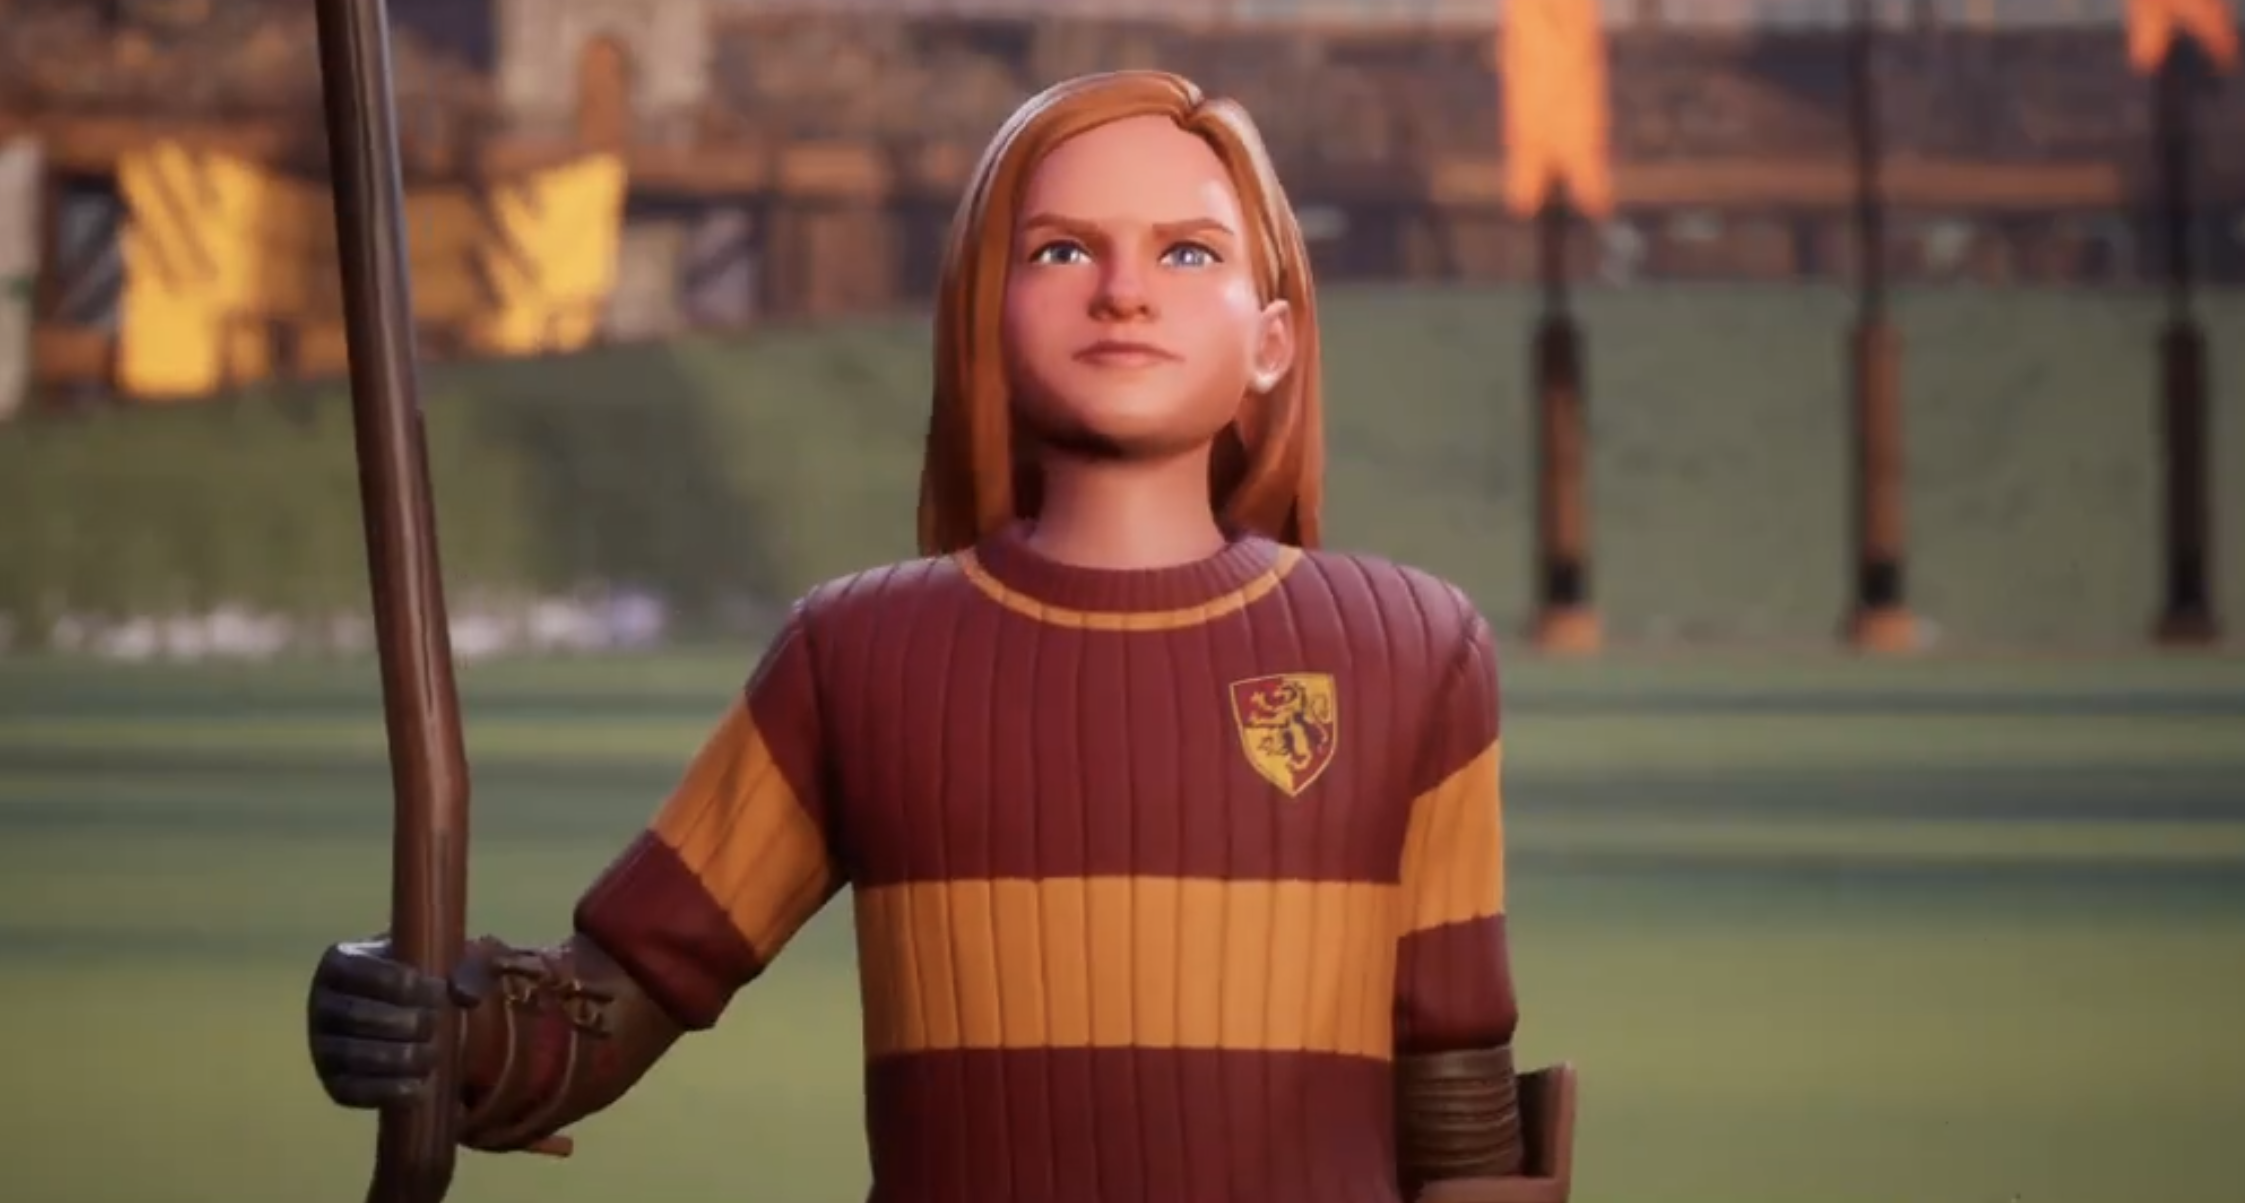 ‘Harry Potter’ Quidditch Video Game Drops First Trailer, Reveals September Release Date